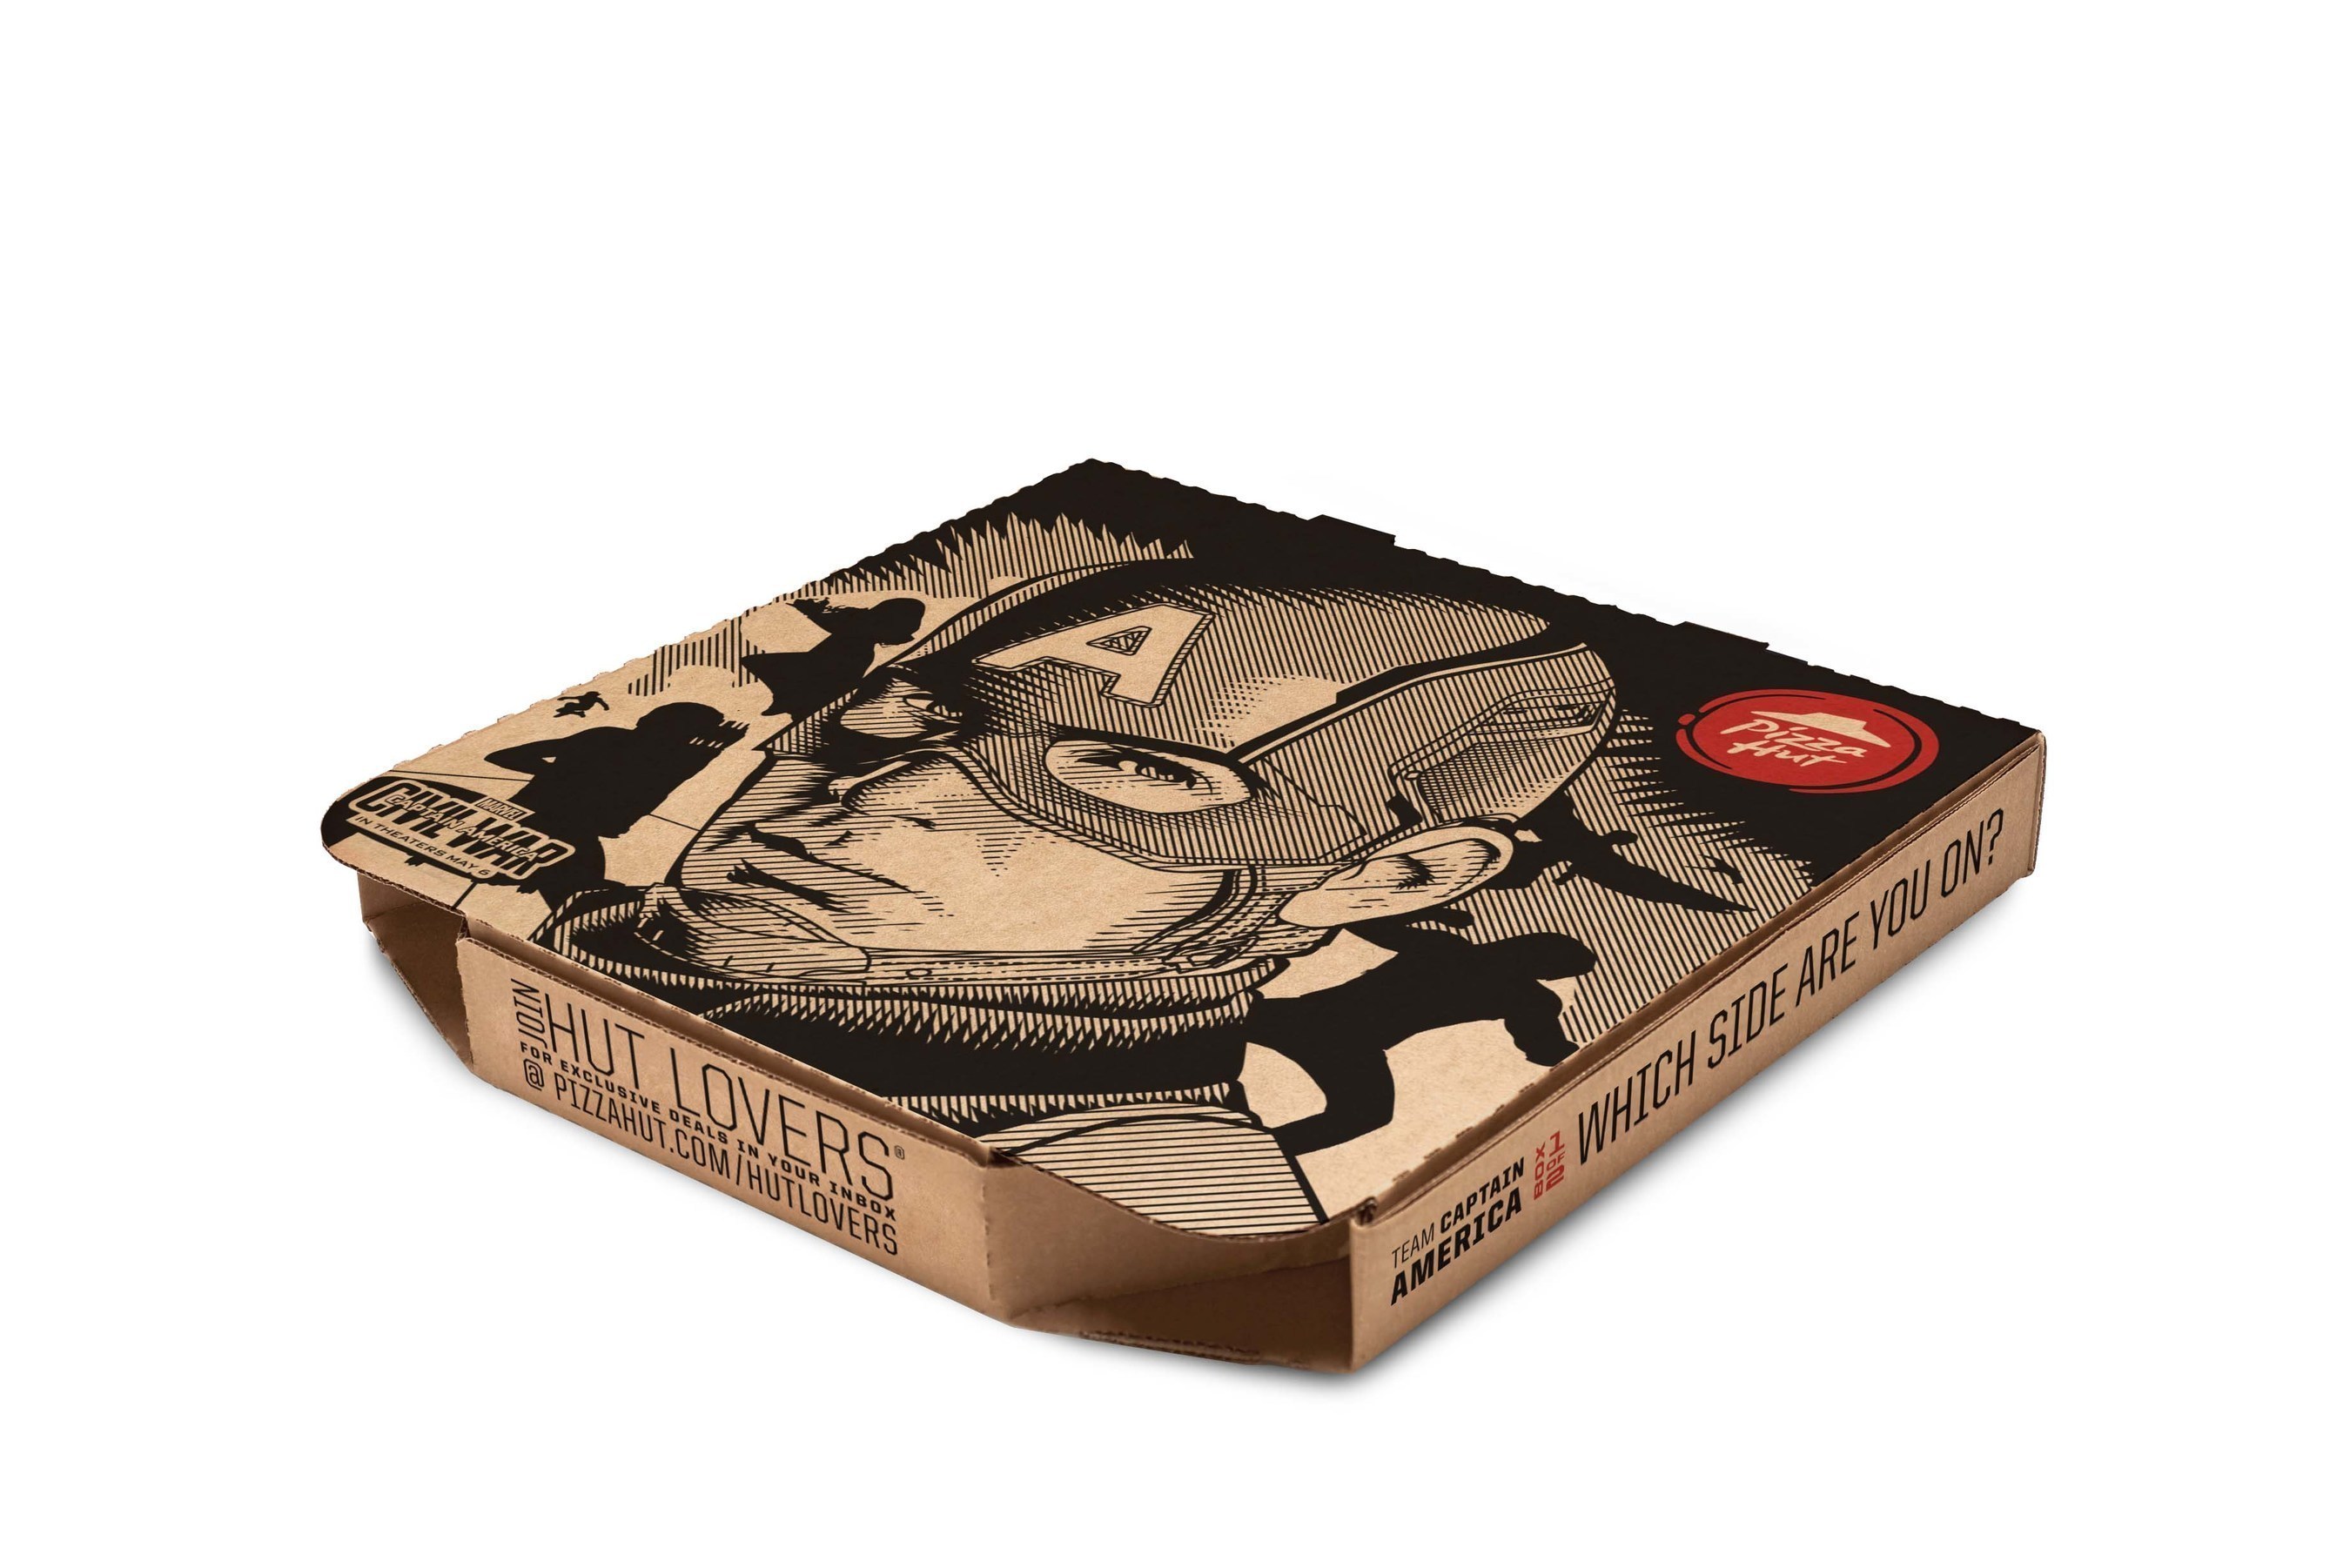 As part of its new partnership with Marvel's "Captain America: Civil War" Pizza Hut reveals set of Captain America & Iron Man pizza boxes, all-new Stuffed Garlic Knots $5 Flavor Menu item, and first-ever post-online ordering entertainment platform at www.PizzaHut.com/CaptainAmerica.